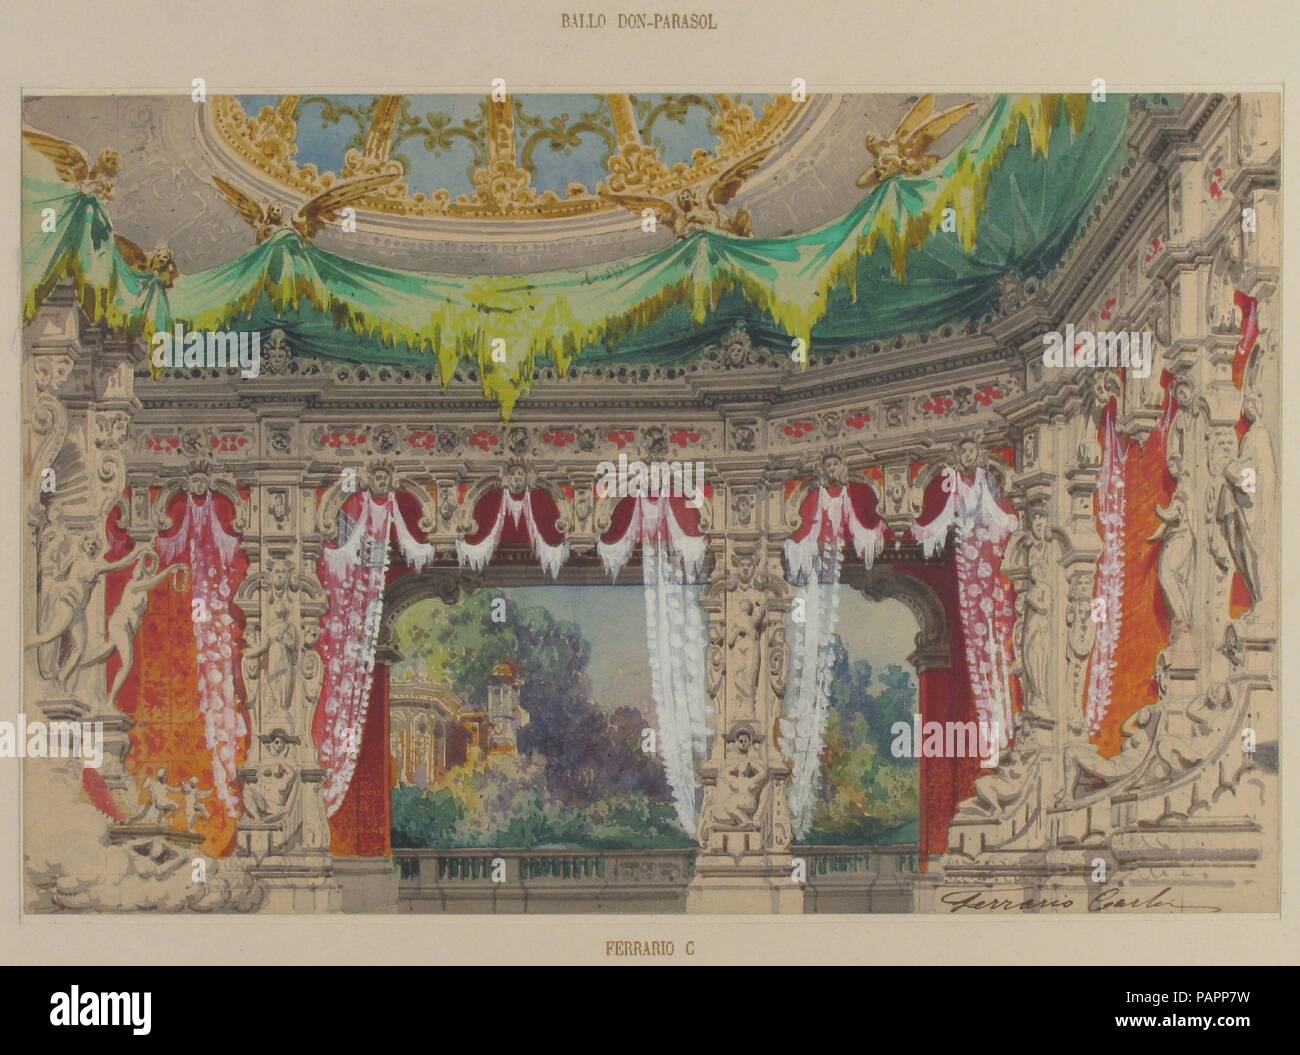 Stage Set Design for a Ballet: Don Parasol. Artist: Carlo Ferrario (Italian, Milan, 1833-1907). Dimensions: Overall: 13 3/4 x 19 1/8 in. (35 x 48.5 cm)  image: 8 7/16 x 13 in. (21.5 x 33 cm). Date: 1869. Museum: Metropolitan Museum of Art, New York, USA. Stock Photo